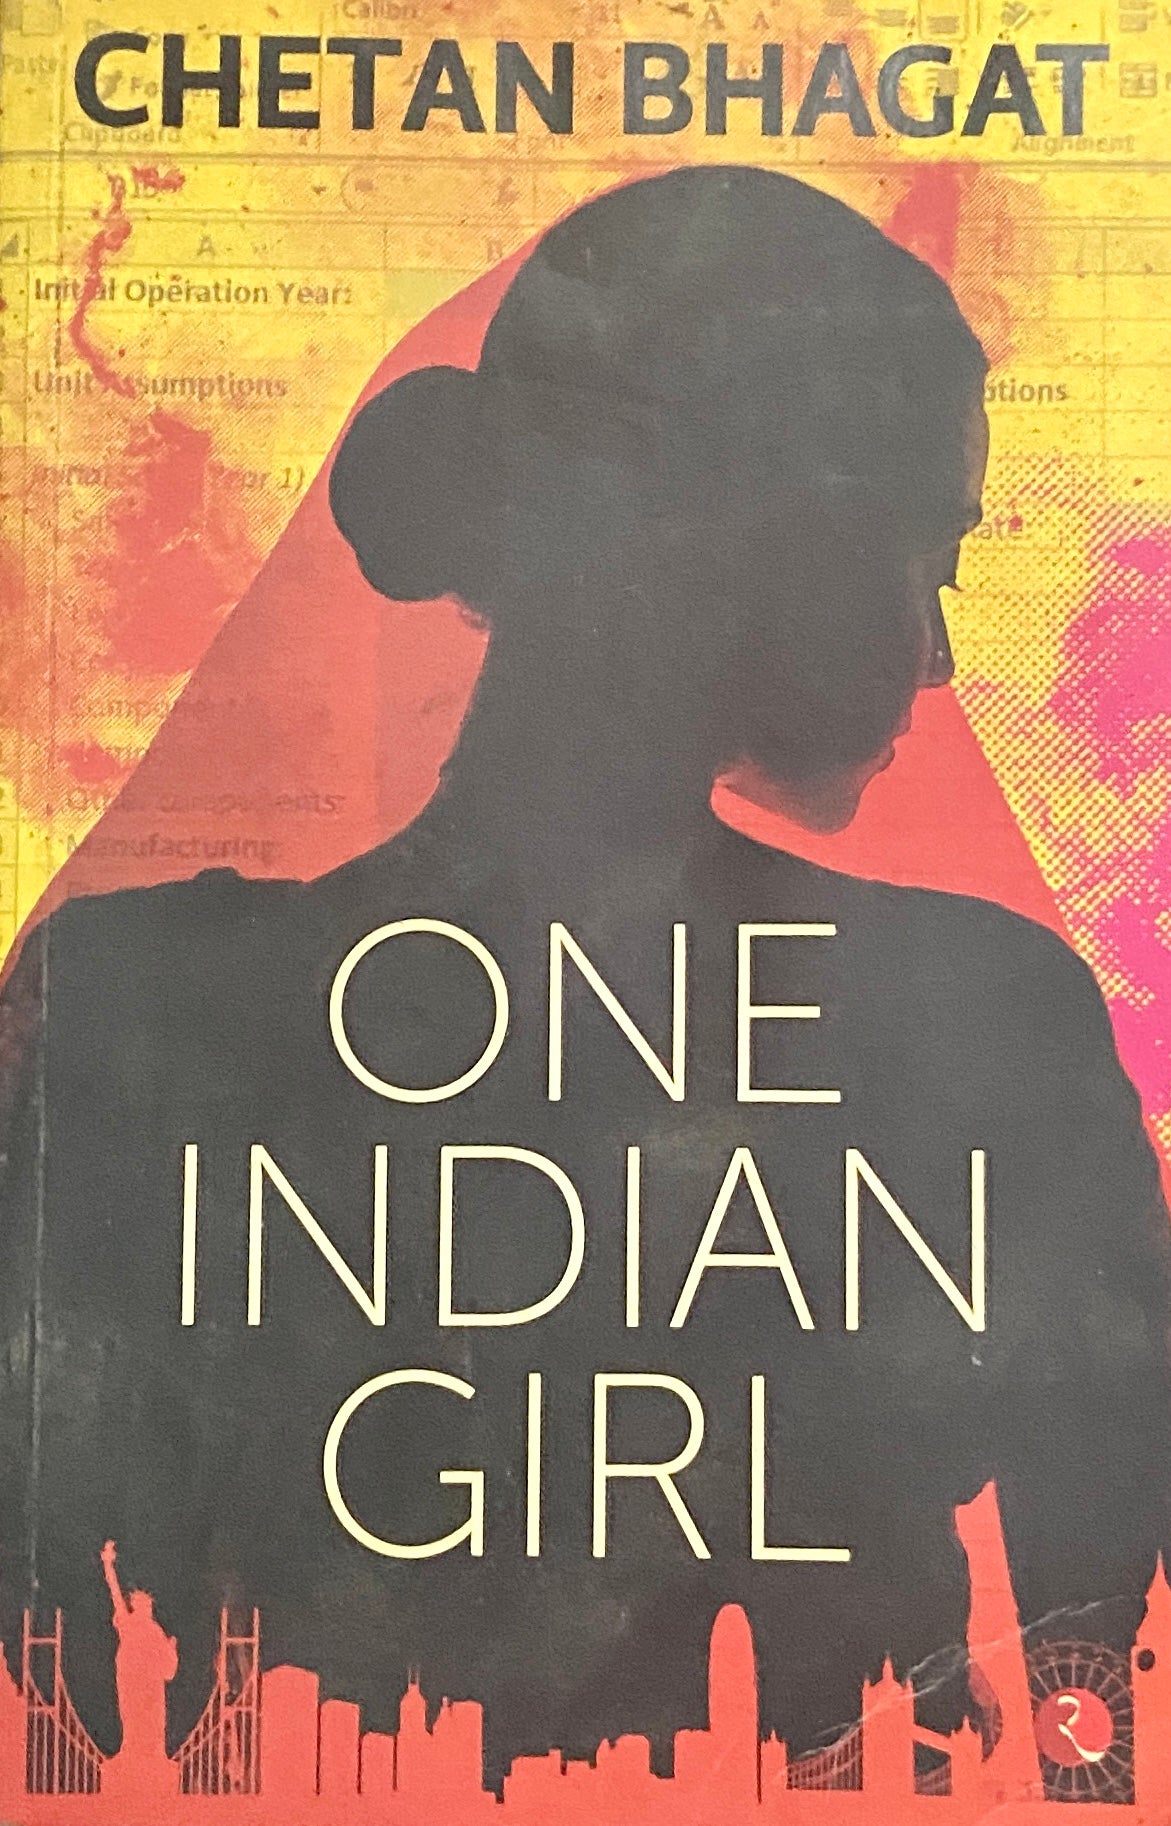 One Indian Girl by Chetan Bhagat